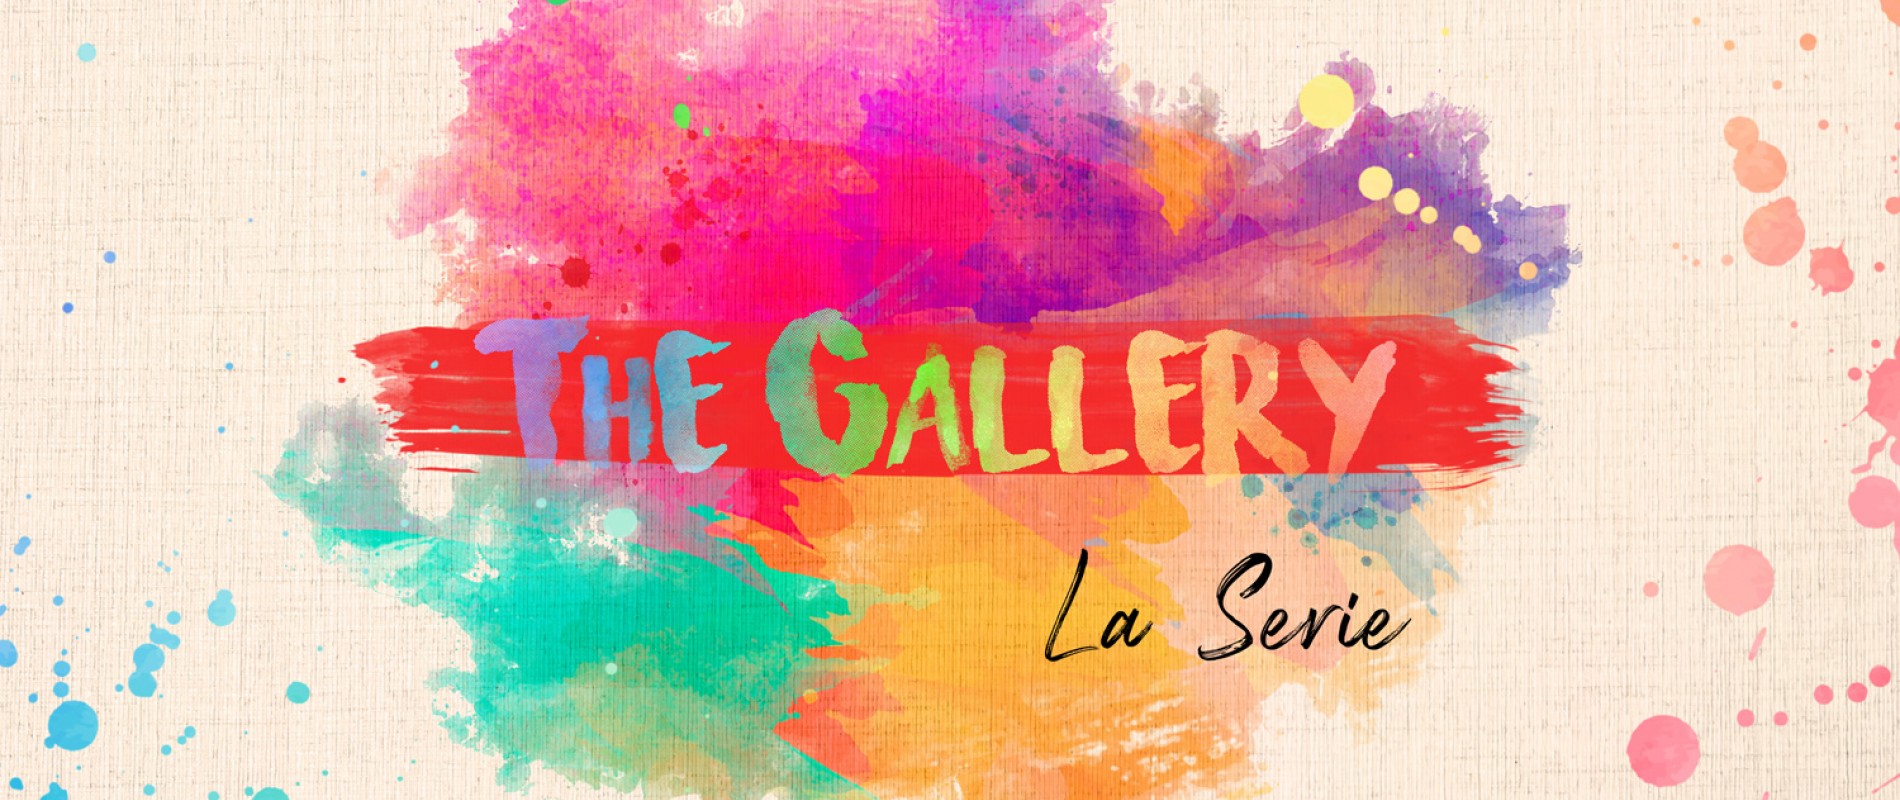 “The Gallery”